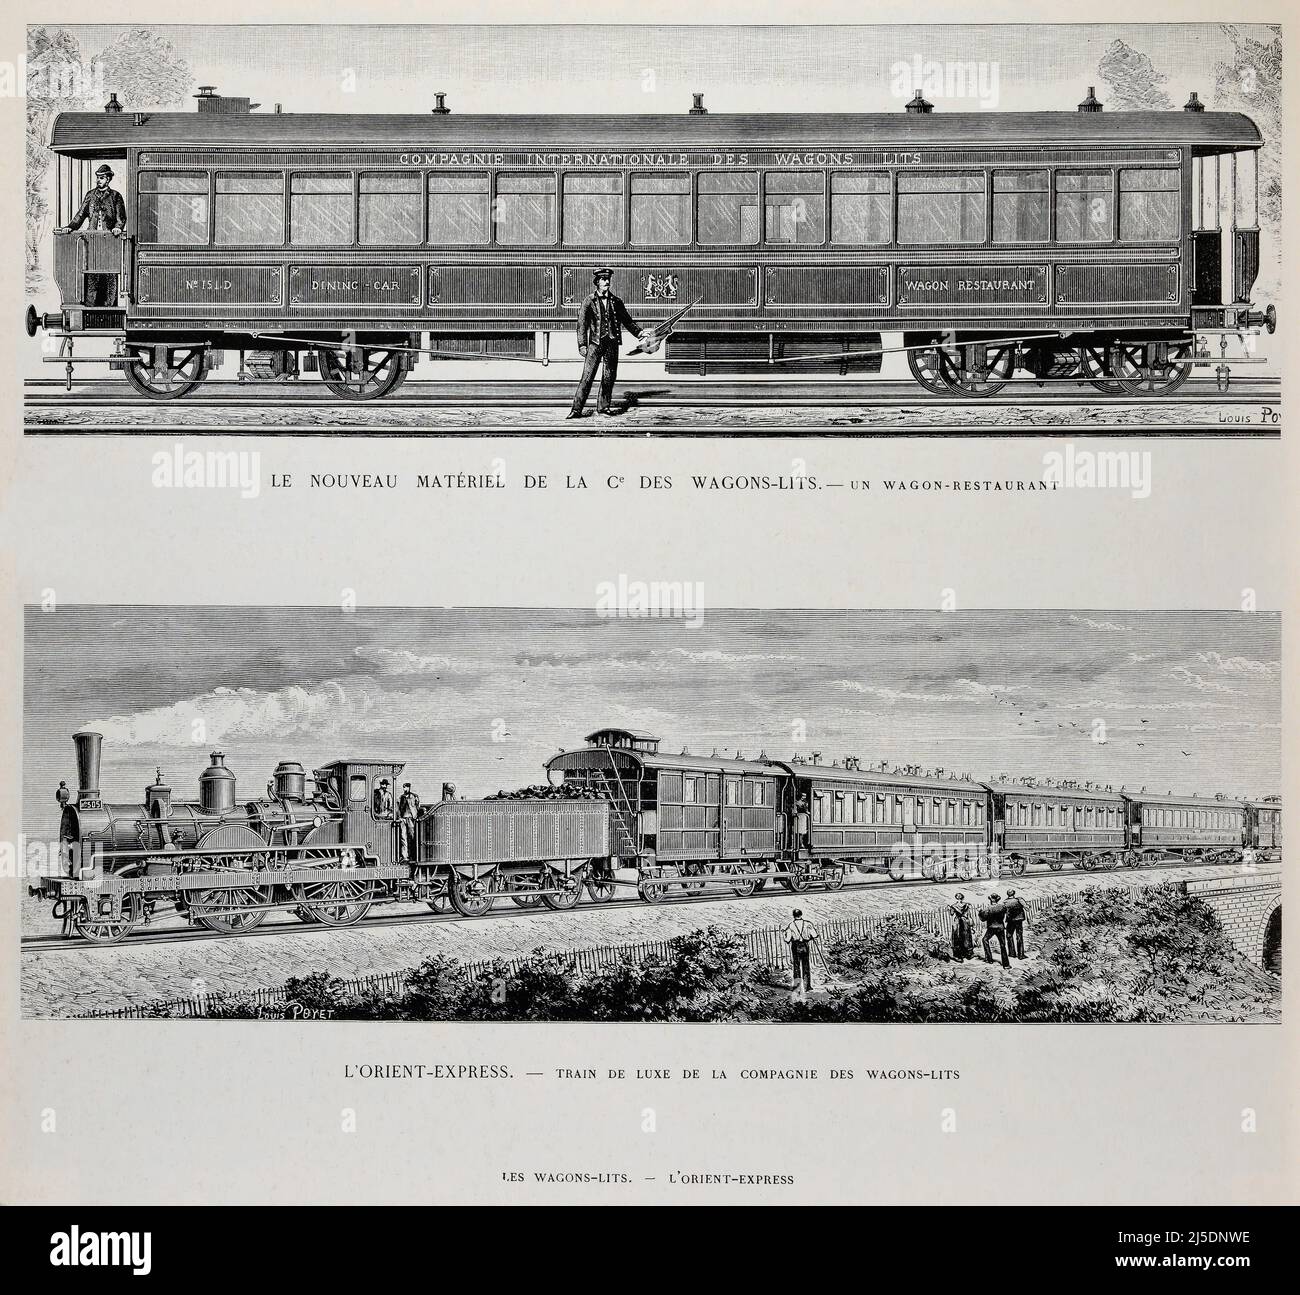 Eng translation : " The Orient-Express a luxury train from the sleeping car  company " - Original in french : " L'Orient- Express un train de luxe de la  compagnie des wagons-lits " -